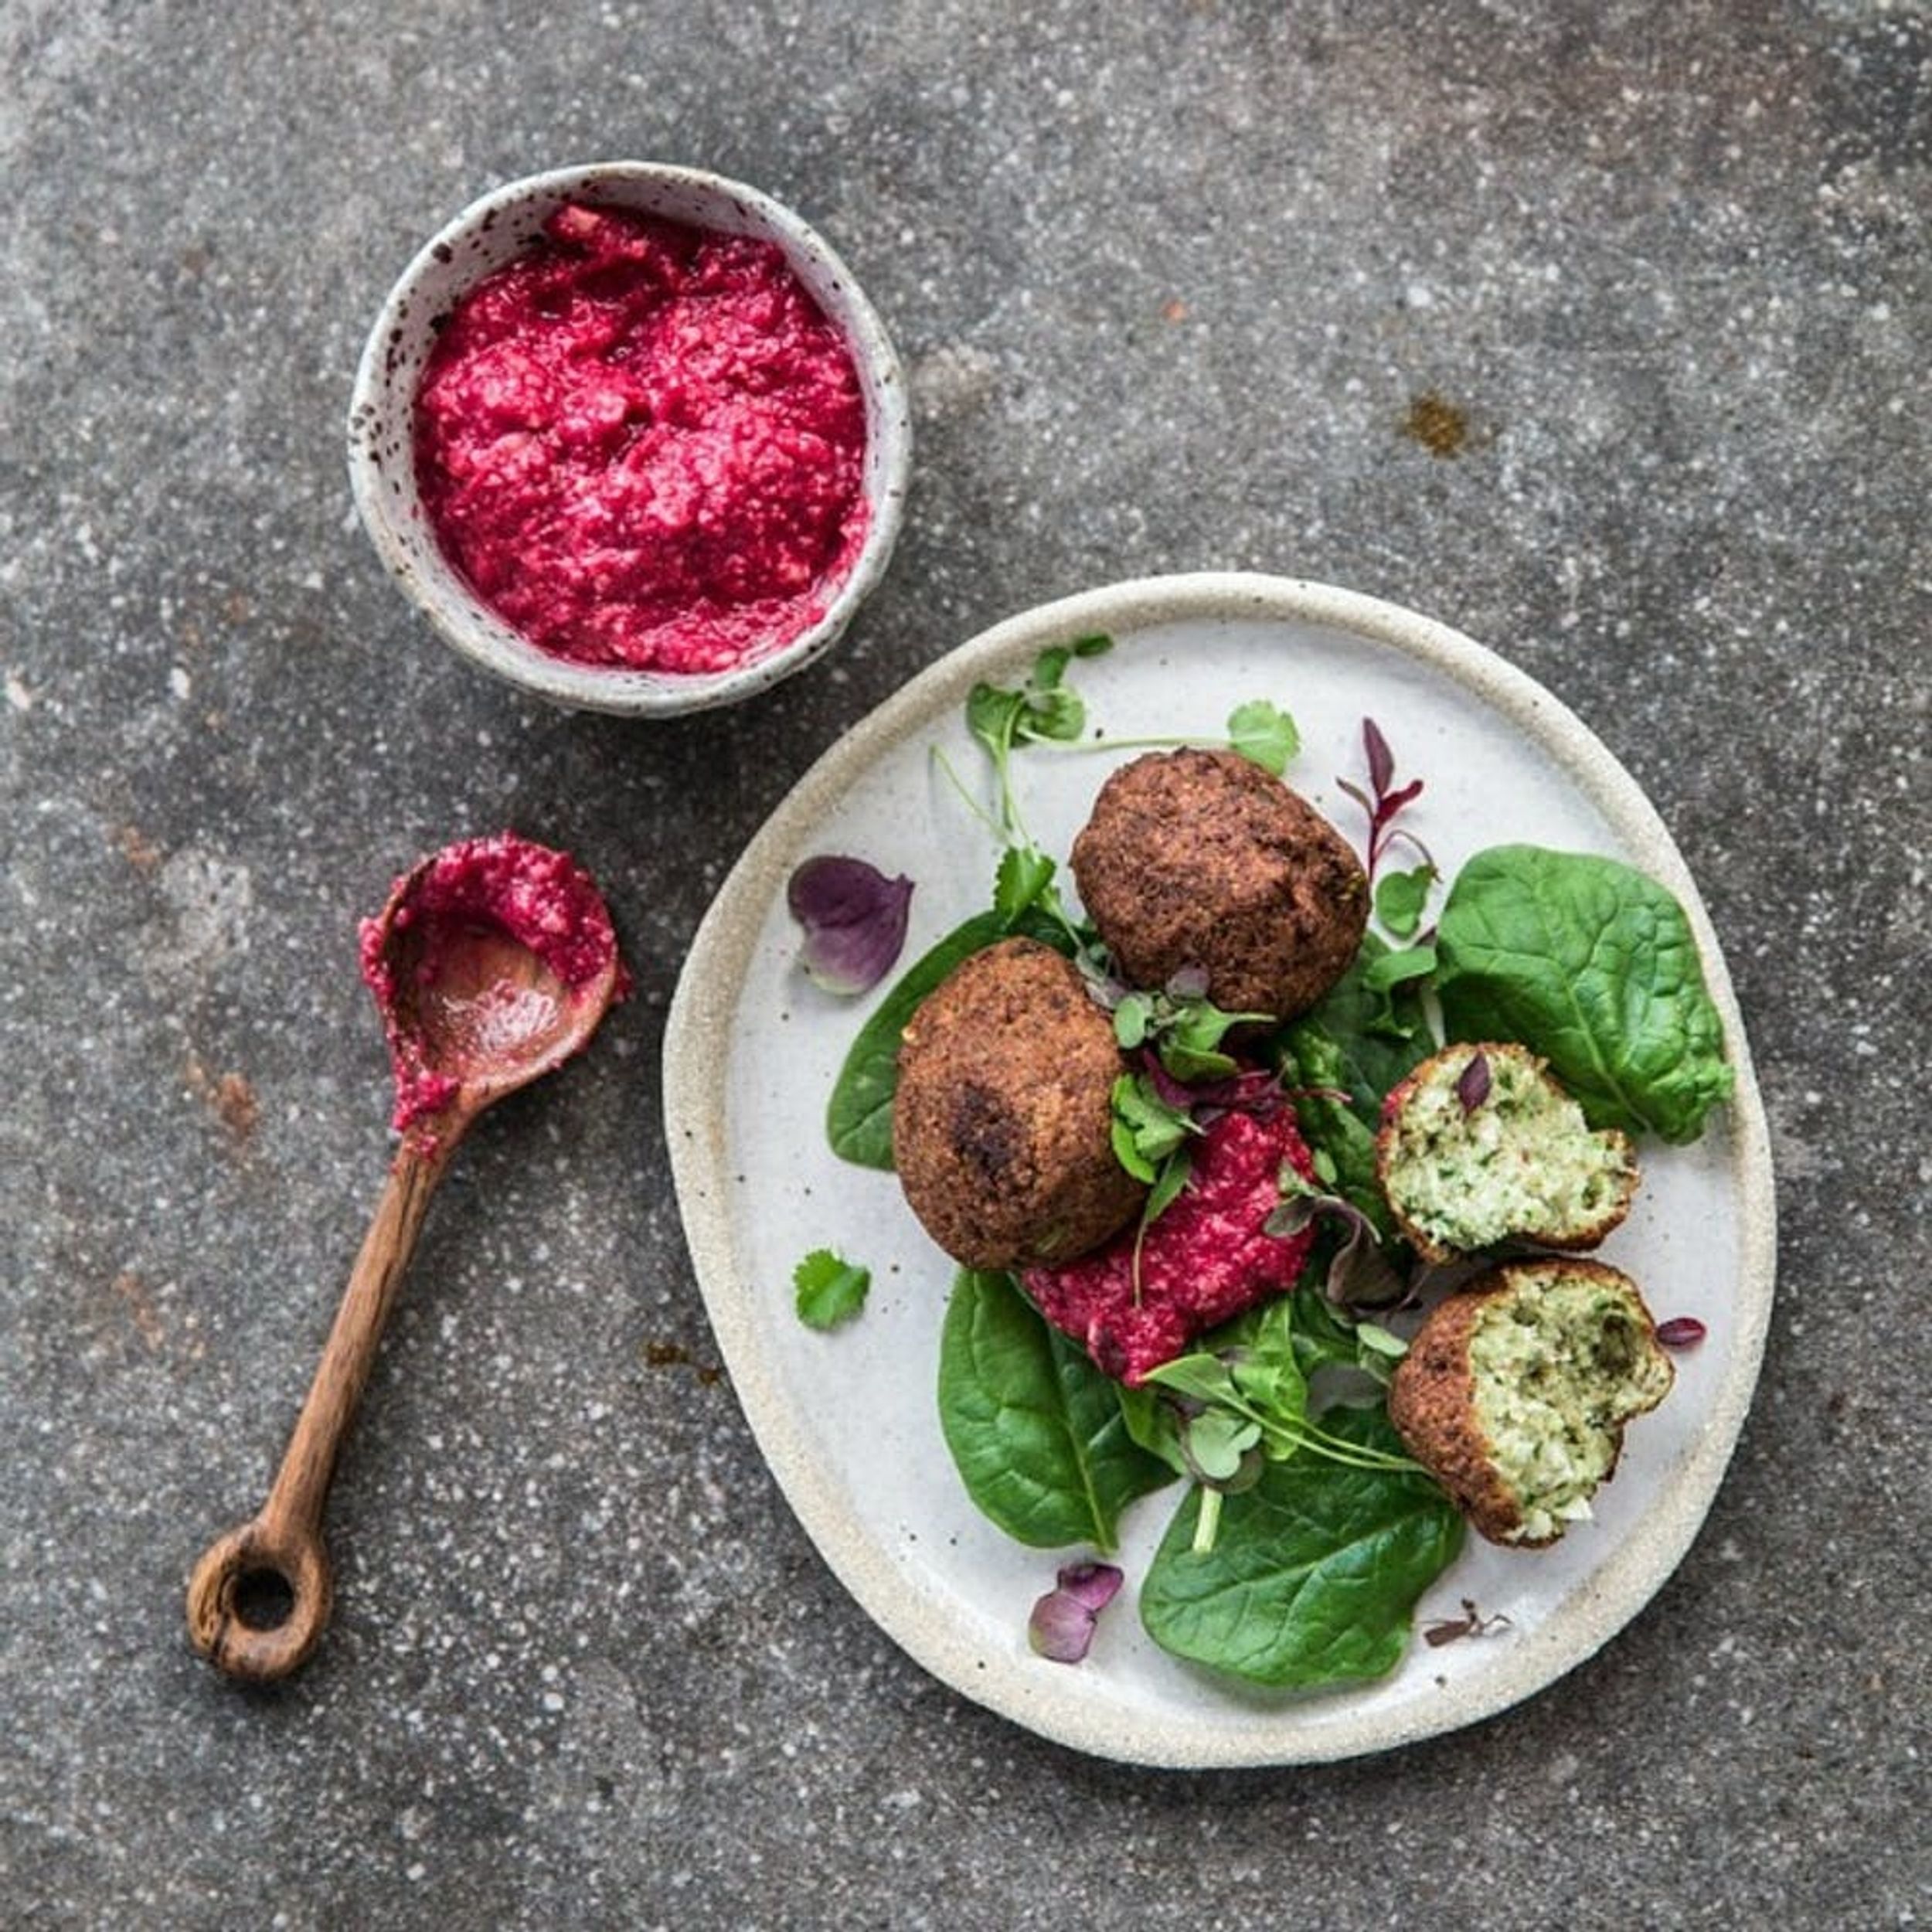 14 Dinner Recipes That Prove Falafel Won’t Make Ya Feel Awful on Meatless Monday